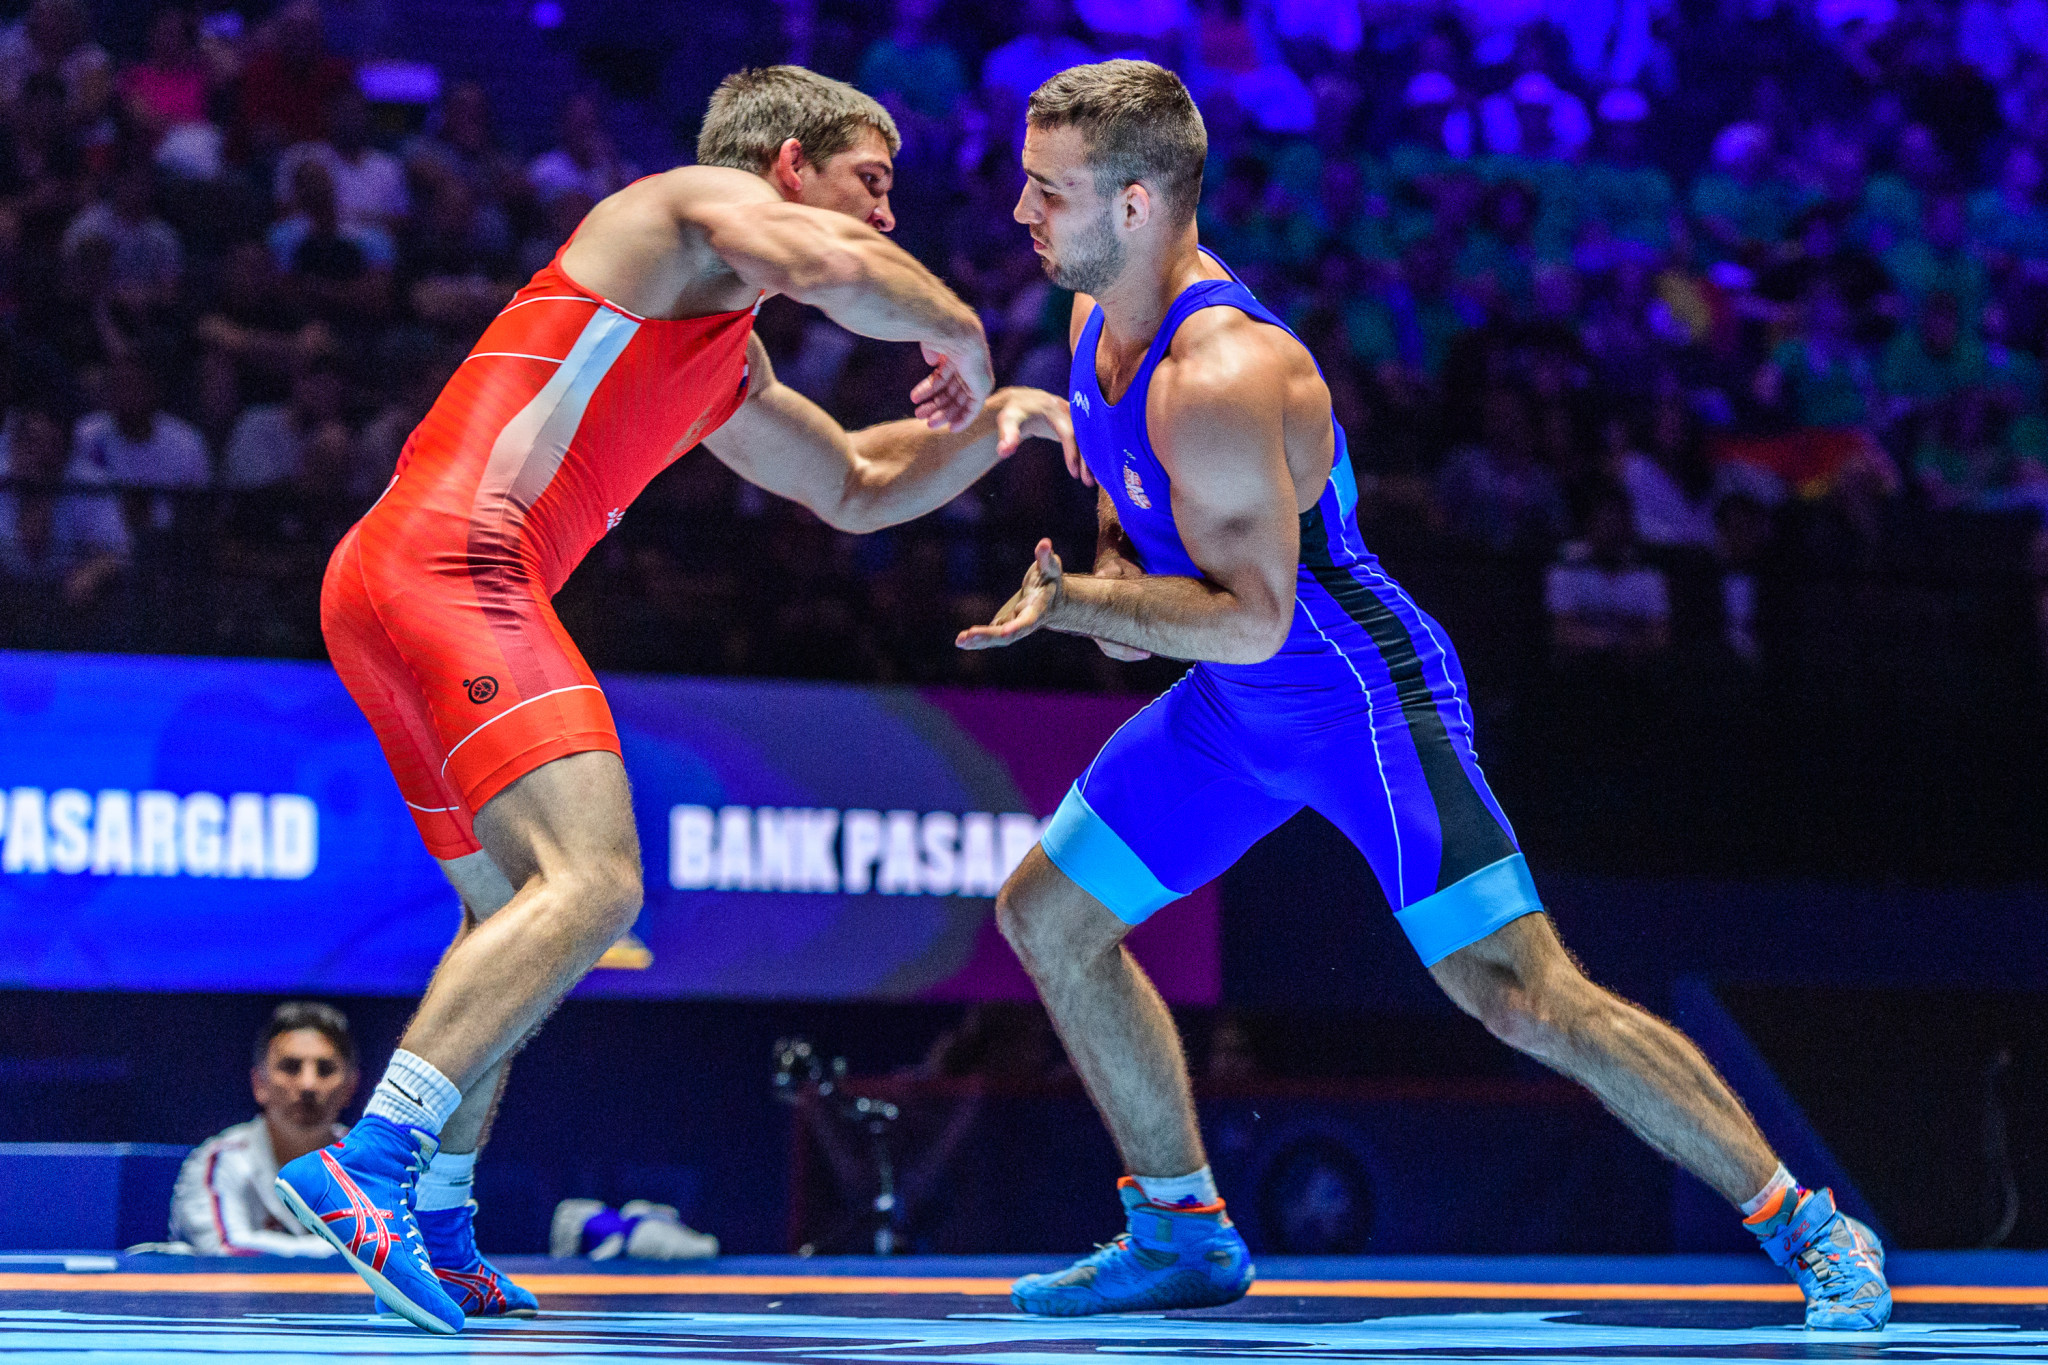 He will face Russia's Aleksandr Chekhirkin for the gold tomorrow afternoon ©UWW